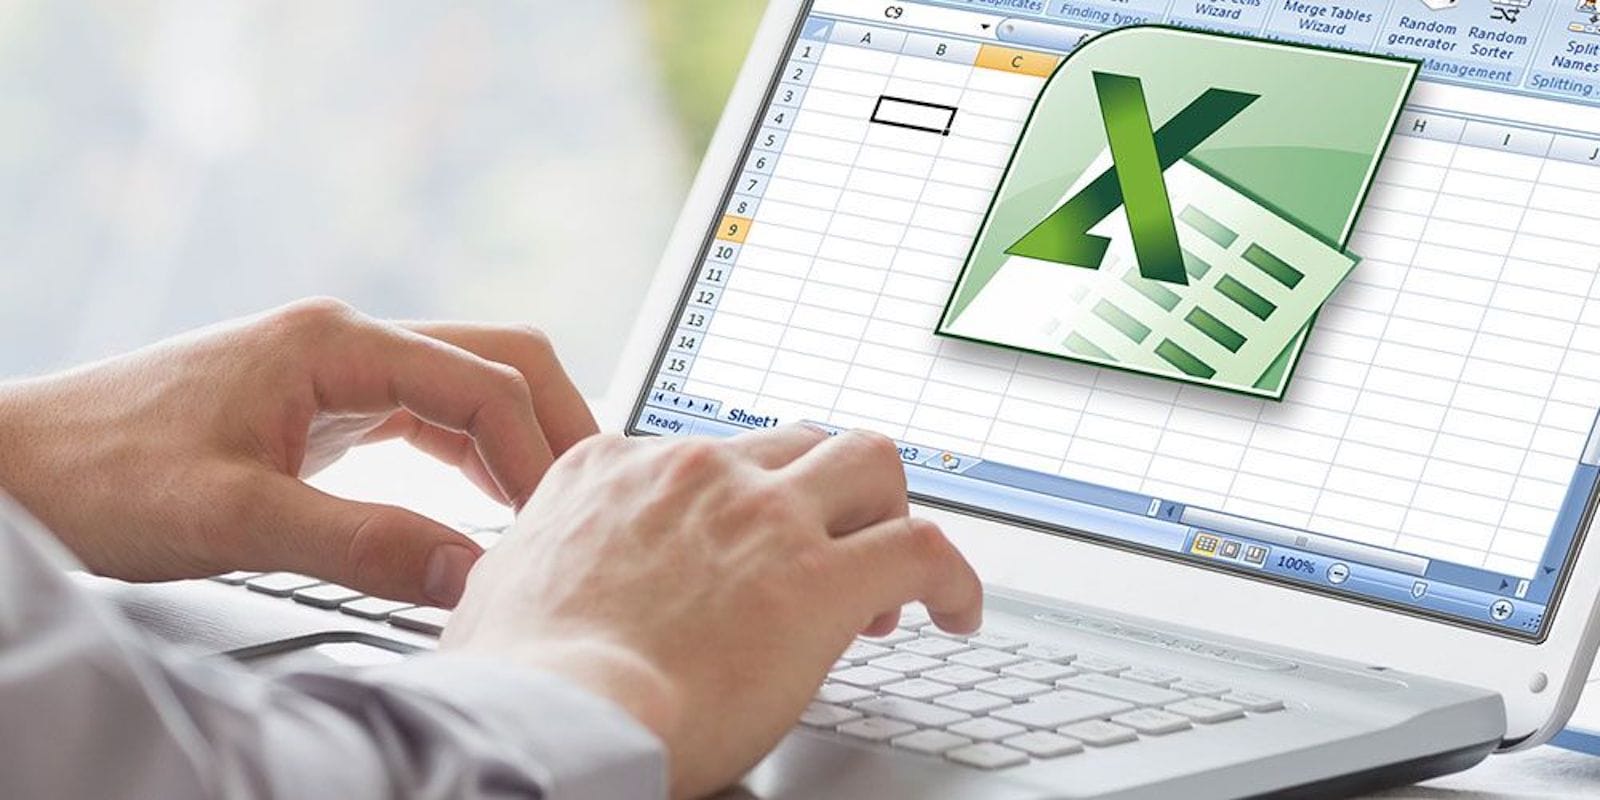 Master one of the most essential apps of the modern workplace, Microsoft Excel.